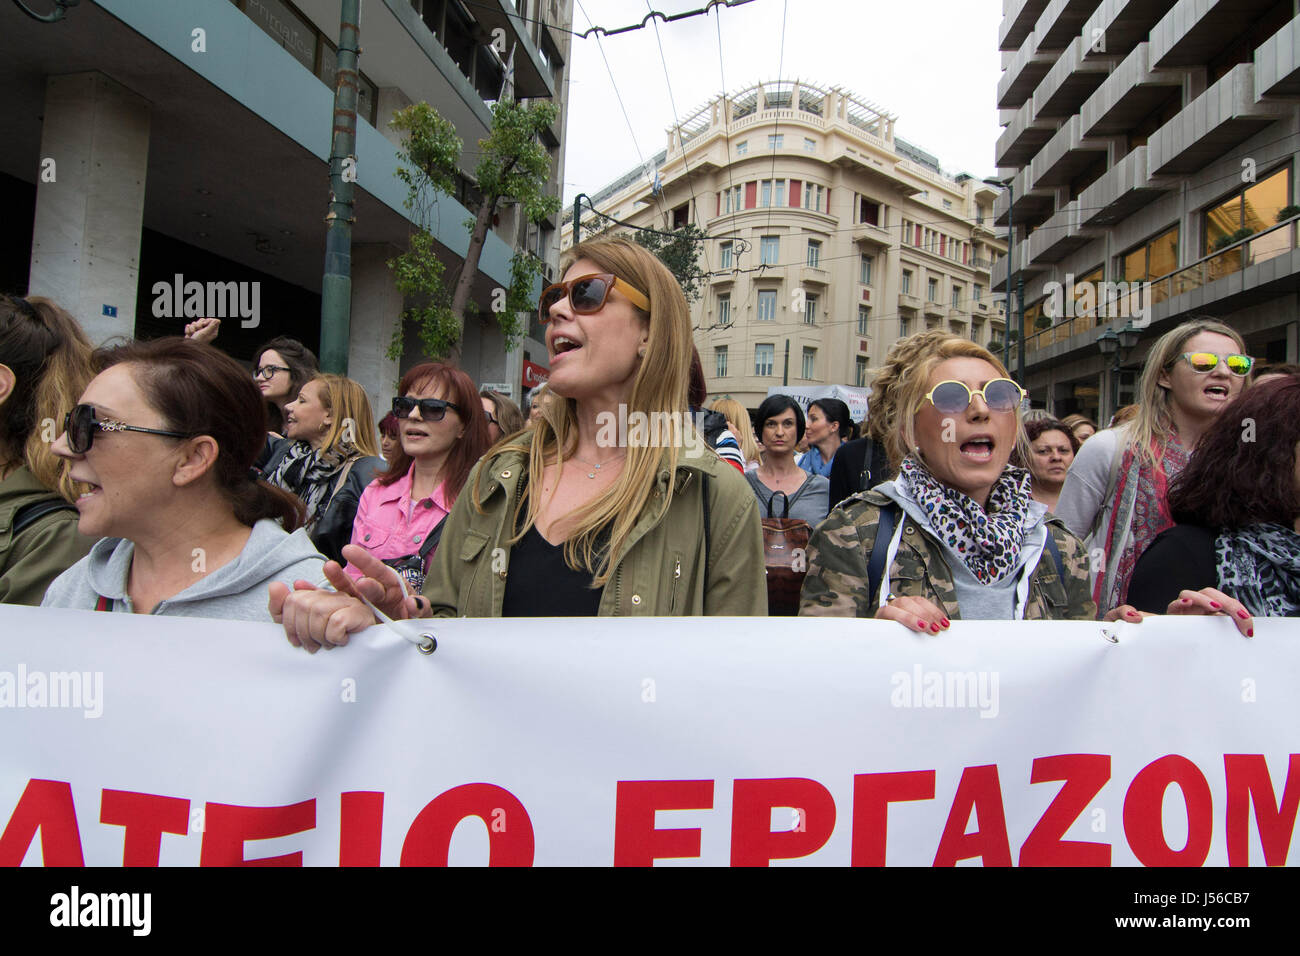 Athens, Greece. 17th May, 2017. Strikers march holding banners and shouting slogans against the government and further upcoming austerity measures. Thousands took to the streets participating in a 24 hour general strike organized by private and public sector unions, protesting against the recent fiscal deal between the government and the country’s creditors. © Nikolas Georgiou / Alamy Live News Stock Photo